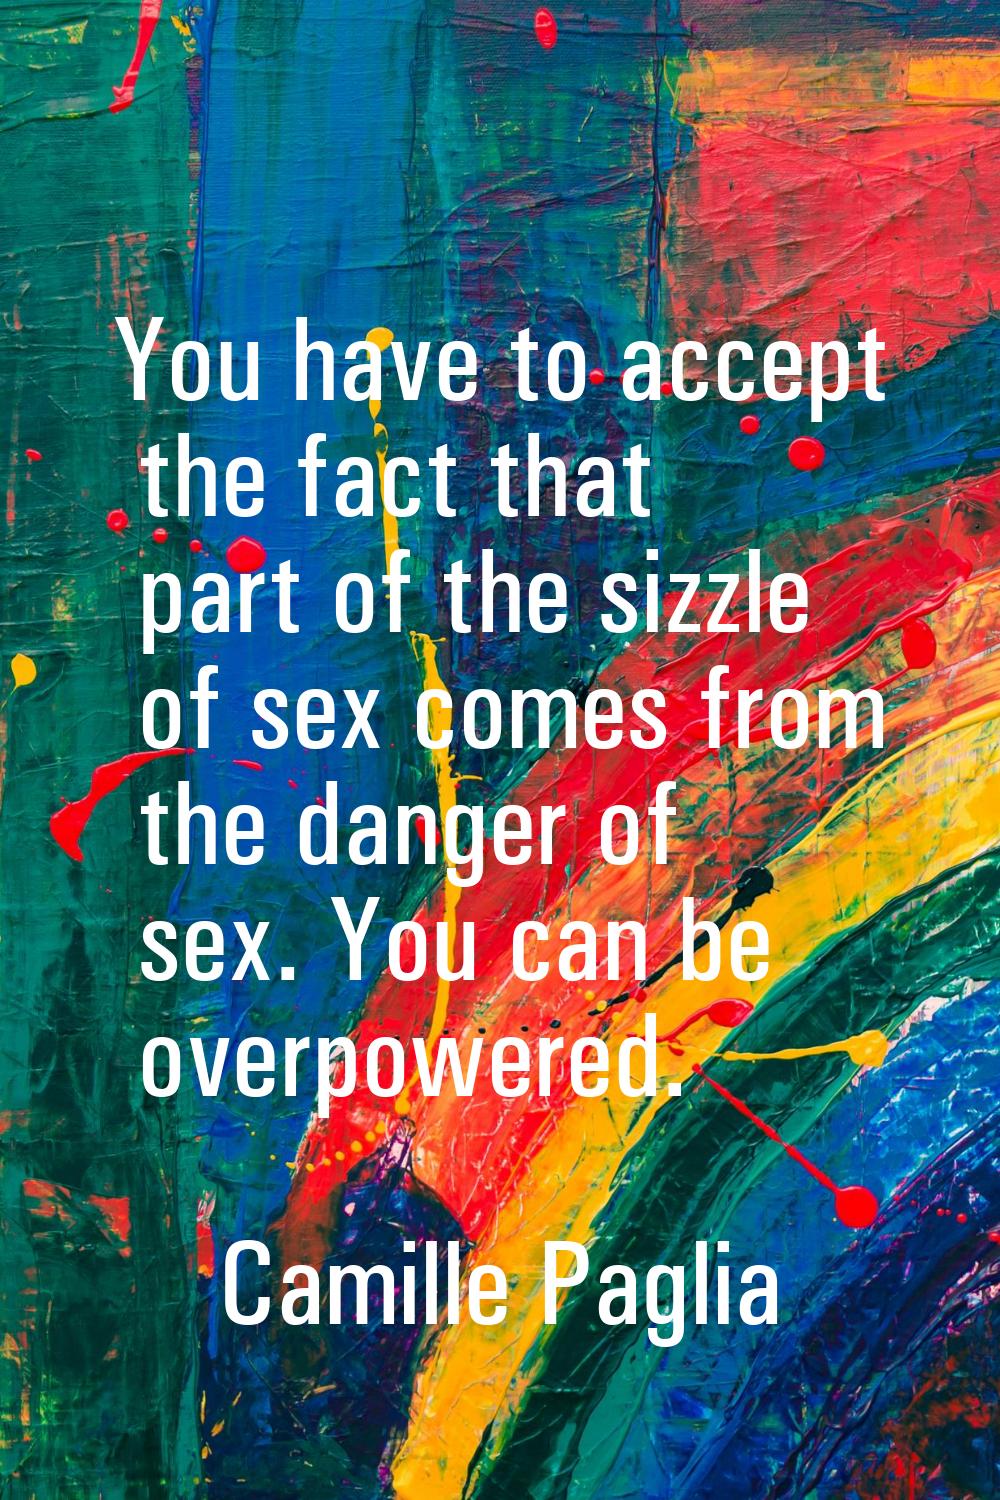 You have to accept the fact that part of the sizzle of sex comes from the danger of sex. You can be